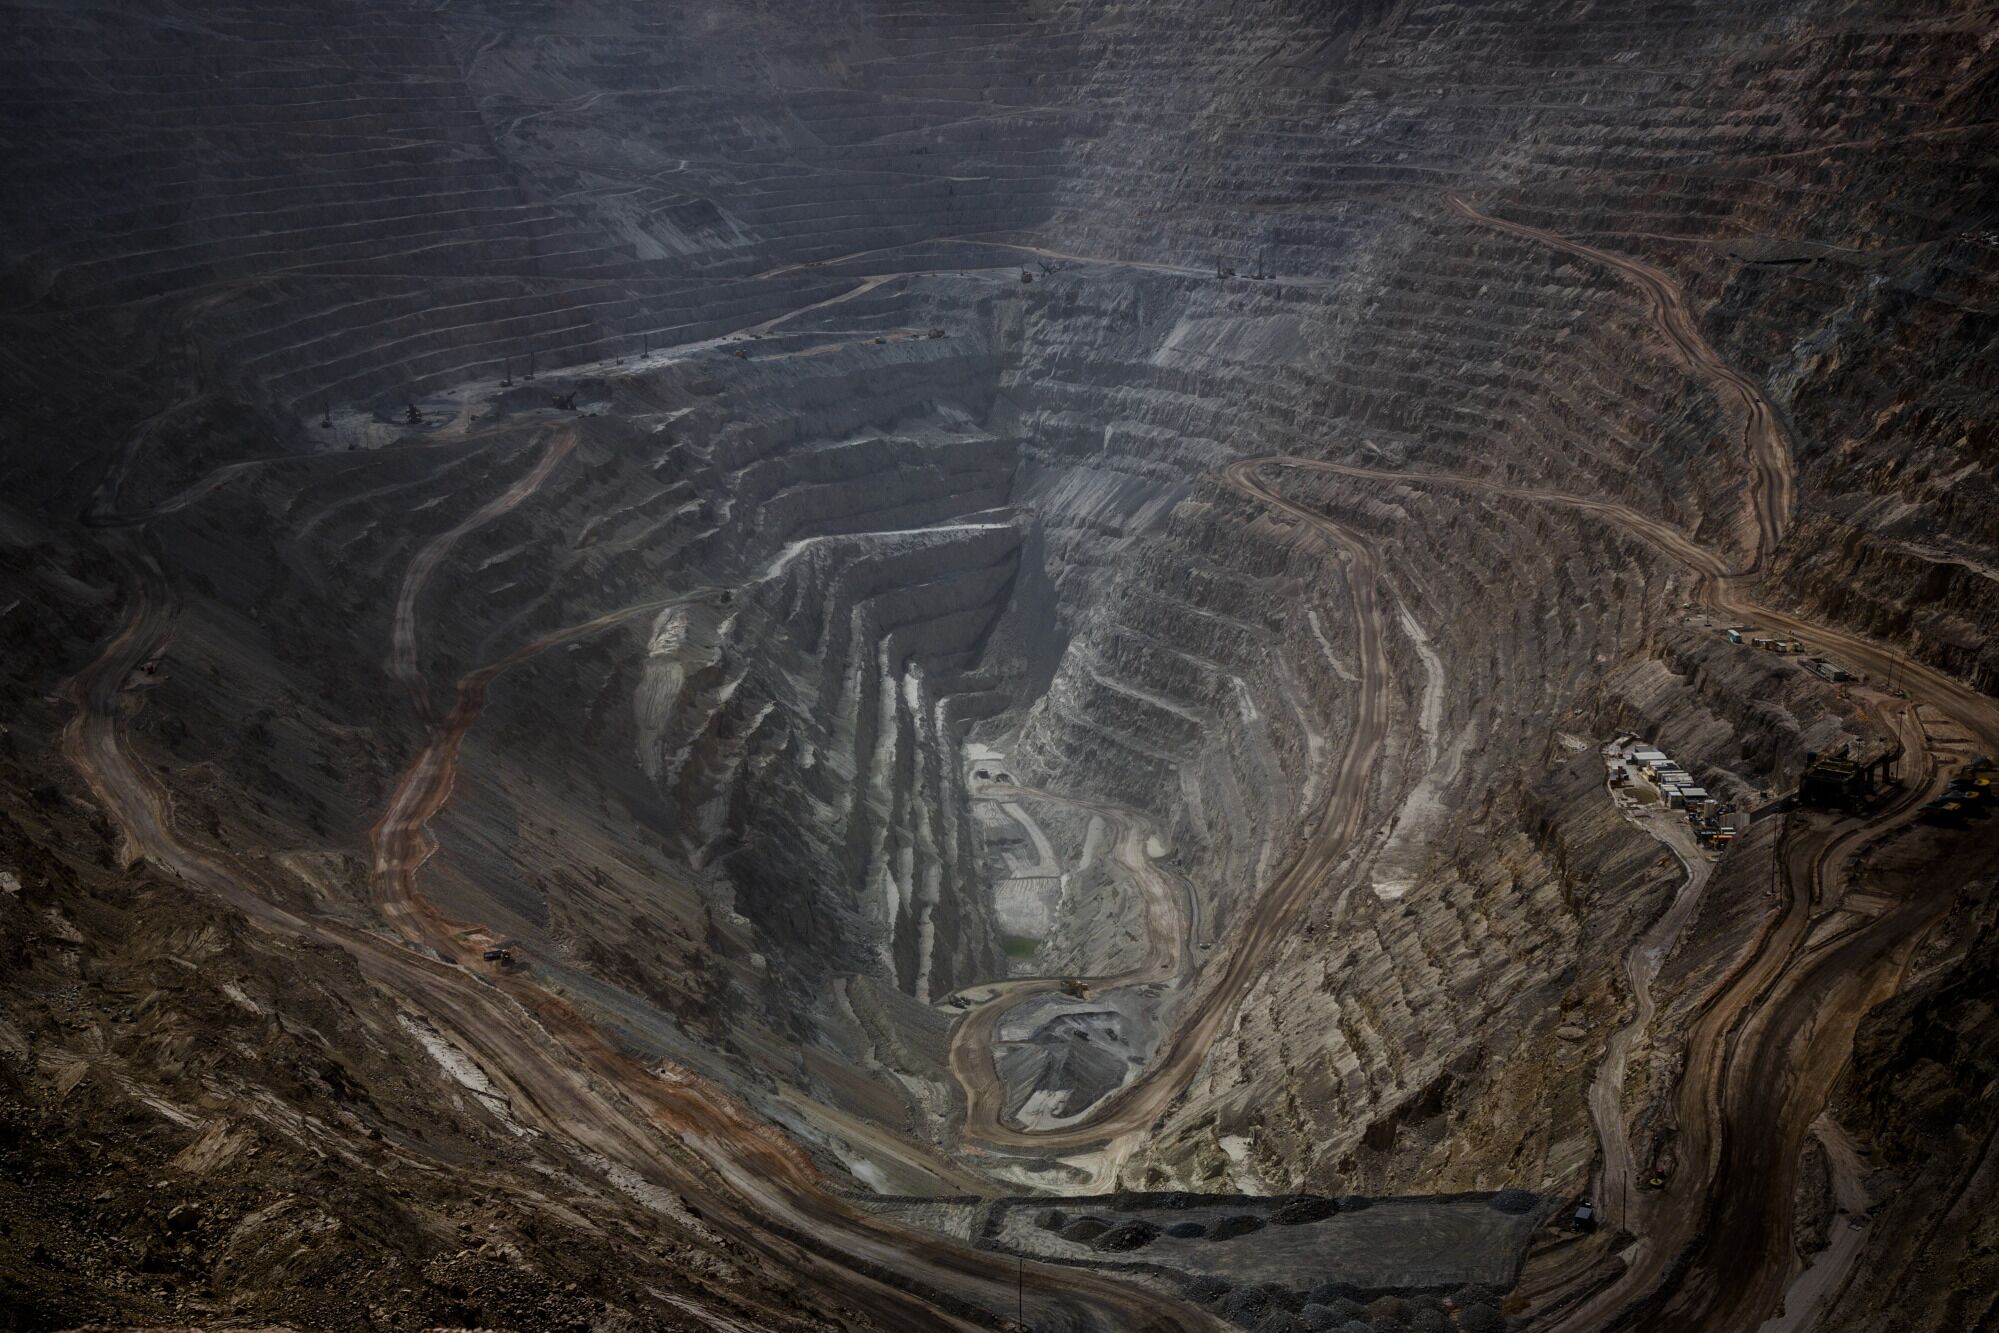 Codelco will not be at risk of bankruptcy, according to its president